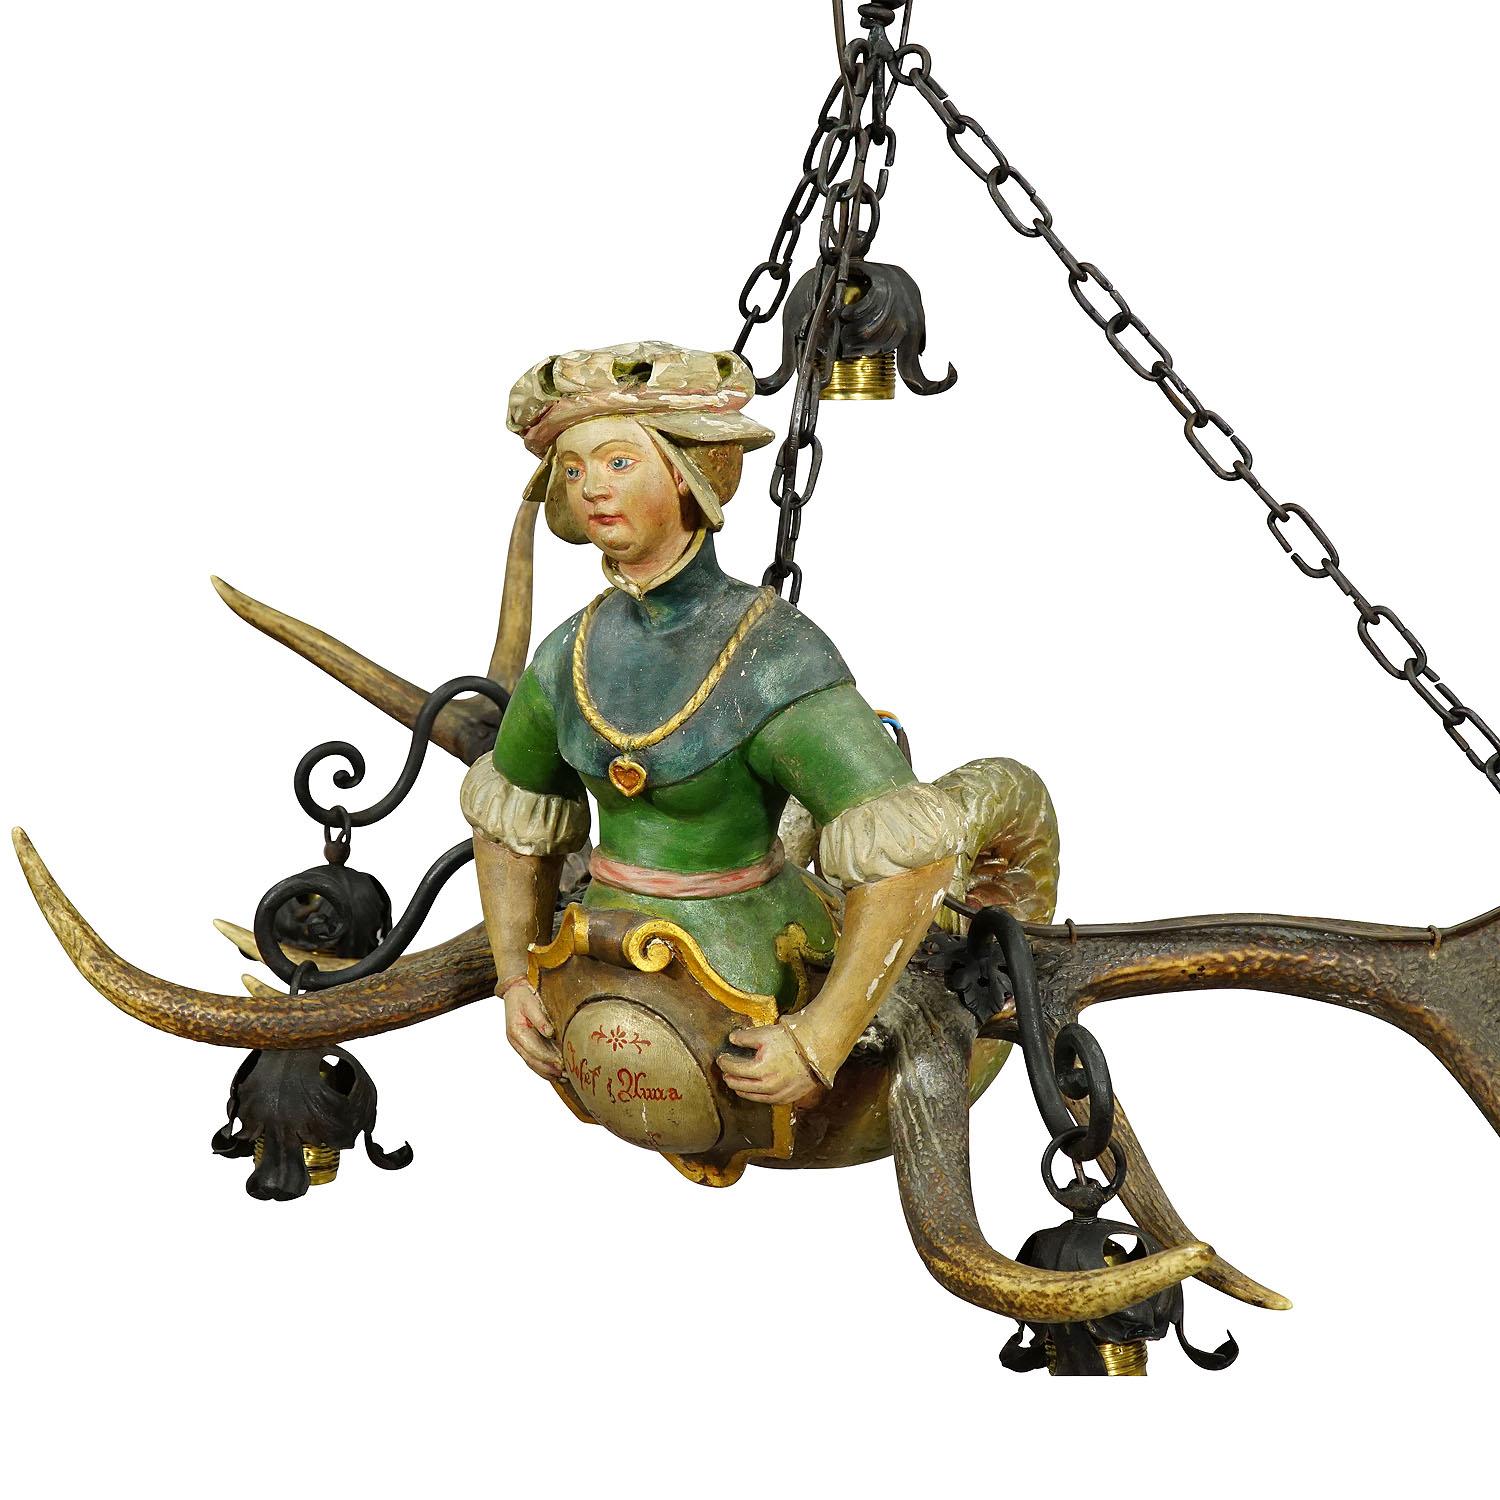 Item e6184
A wooden hand carved and painted statue of a two tailed meermaid representing a medieval lady. Fixed on a large pair of original deer antlers. Named lusterweibchen or lüsterweibchen, executed circa 1890. With hand forged iron suspension